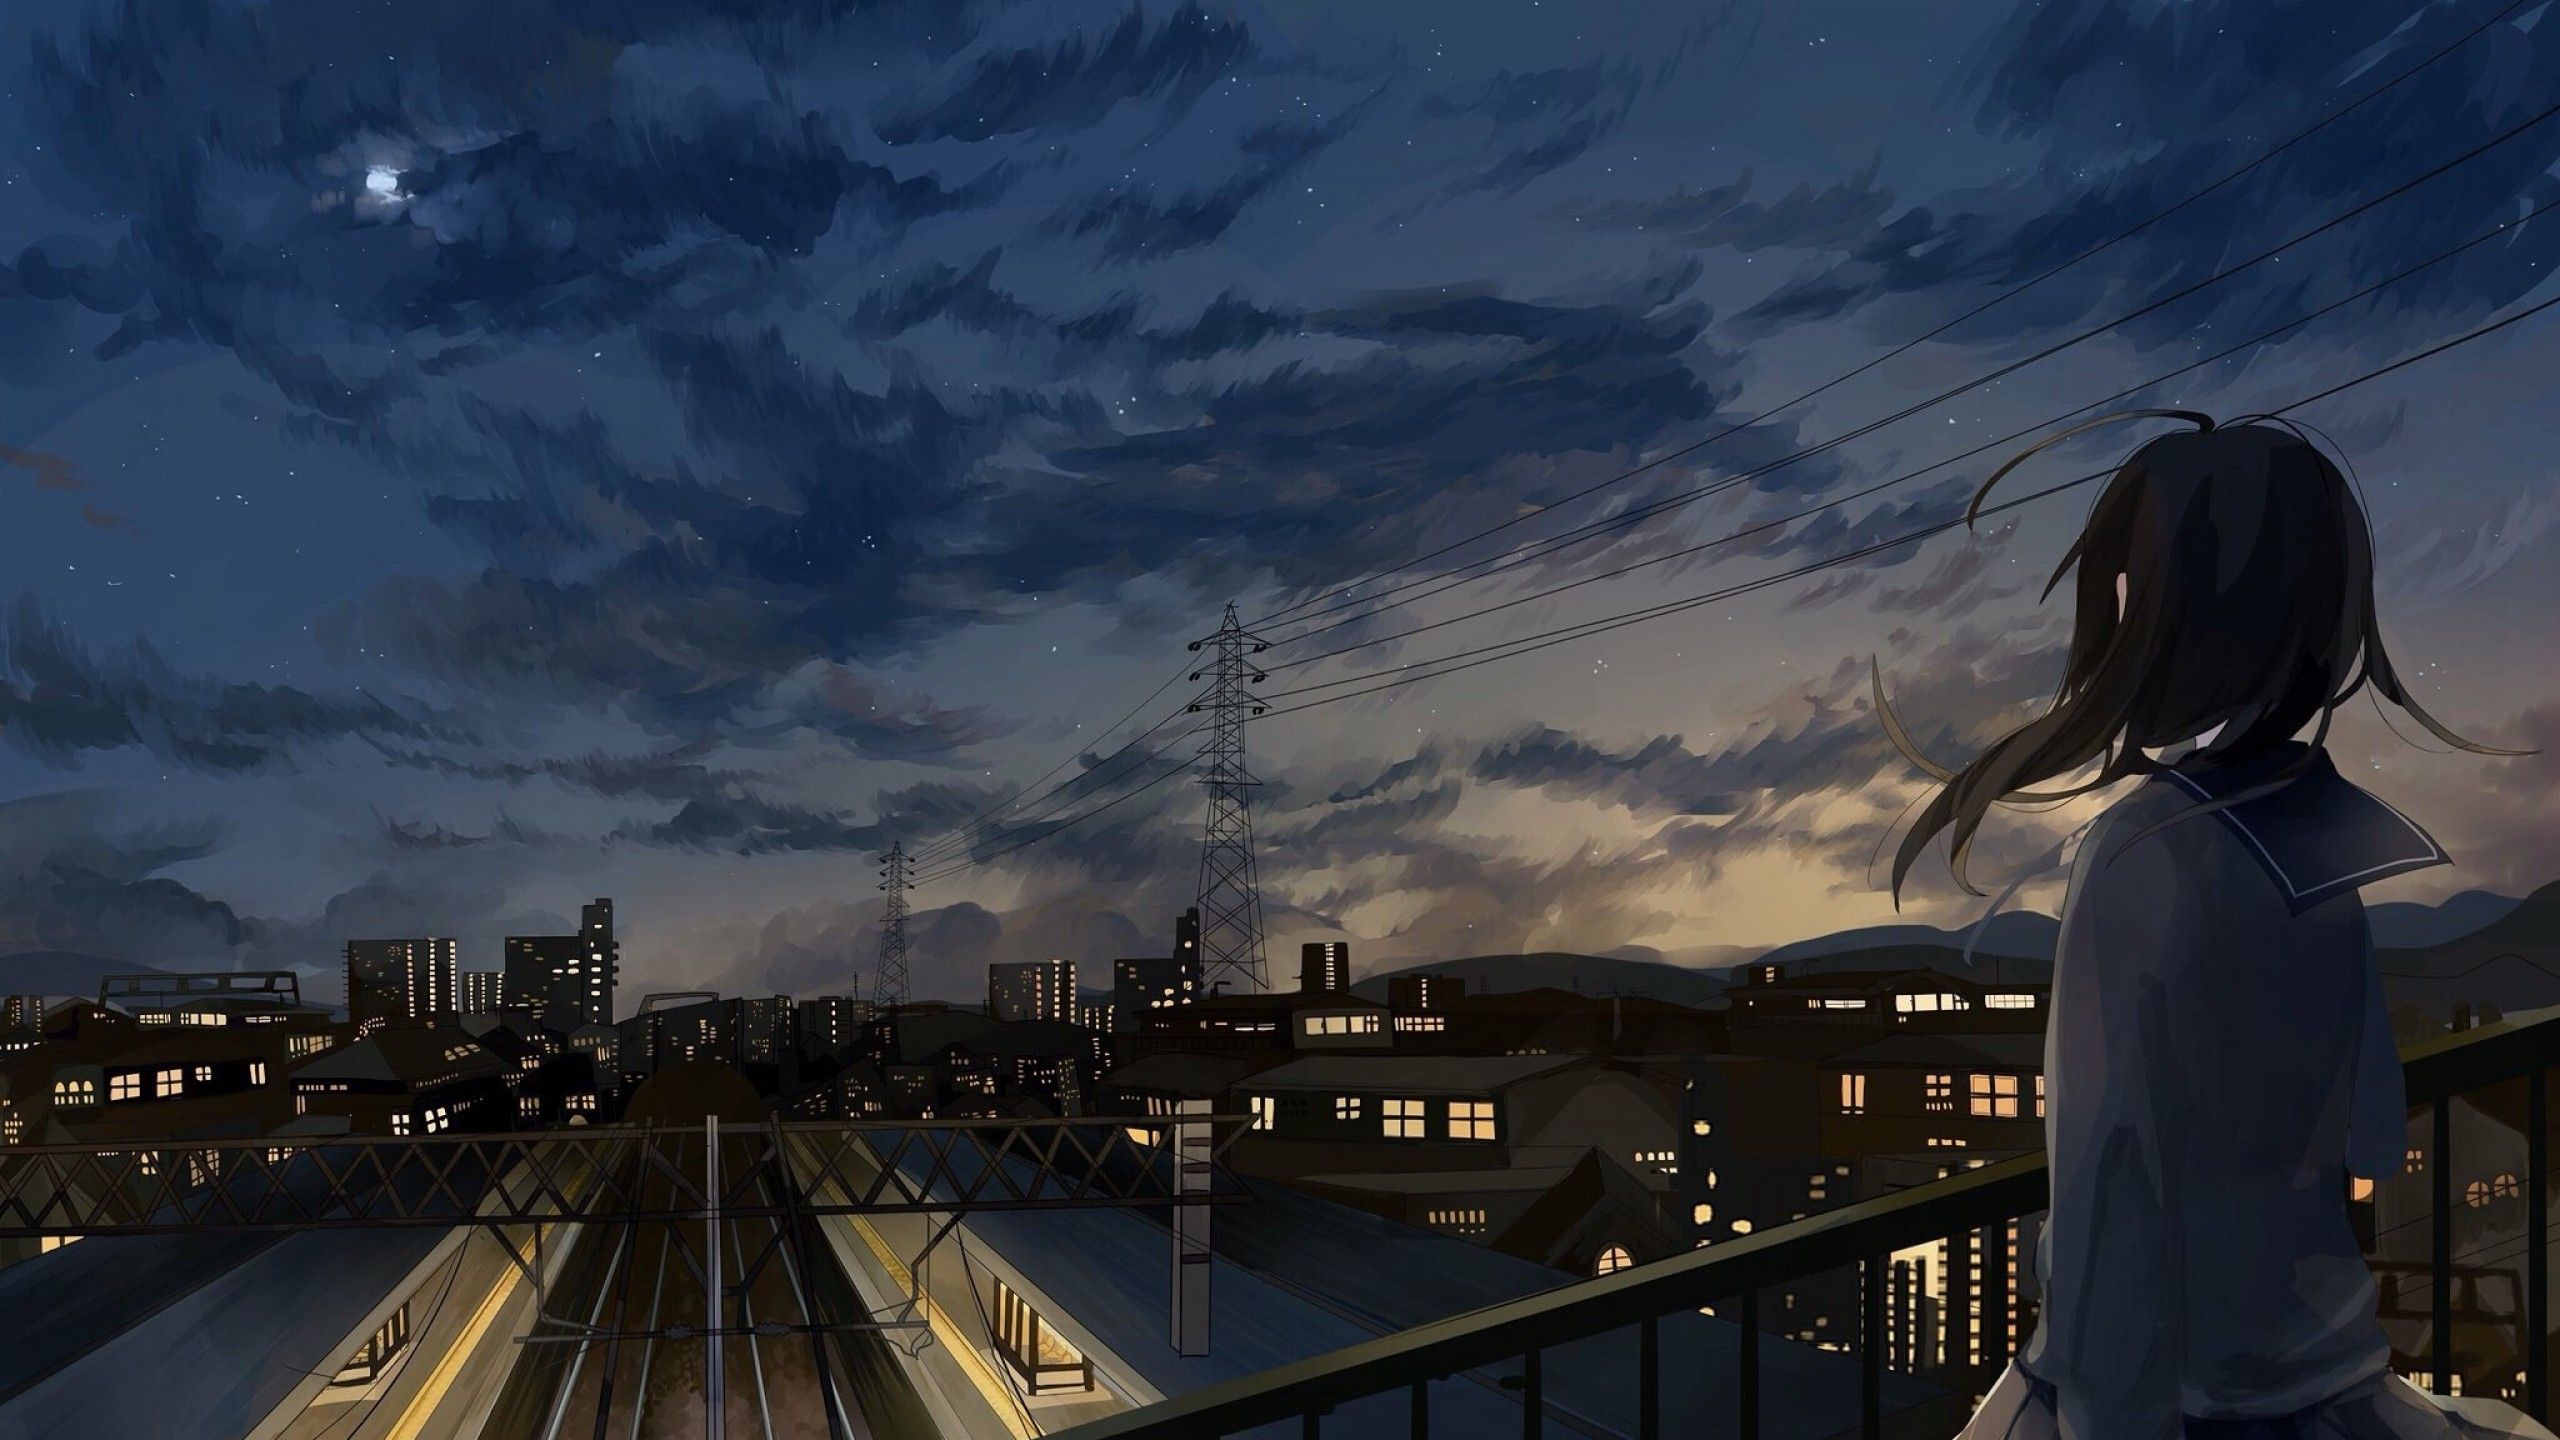 Download 2560x1440 Anime Girl, City, Night, Clouds, Back View, School Uniform Wallpaper for iMac 27 inch